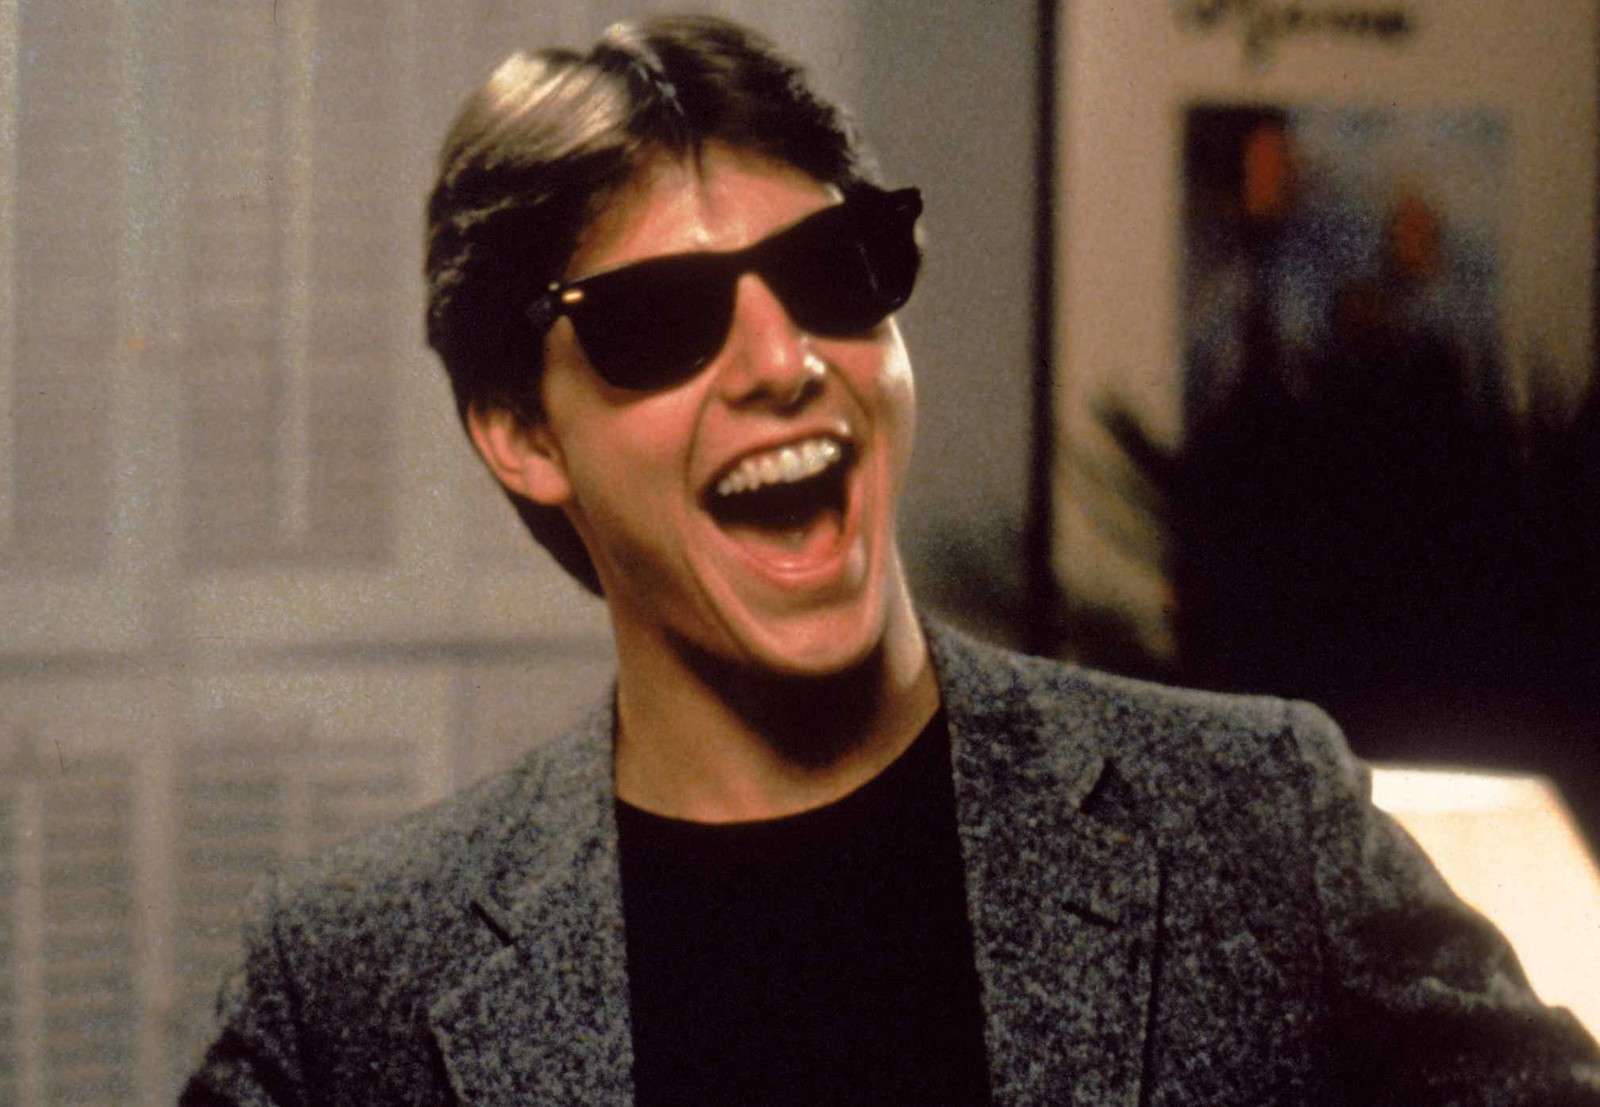 Tom Cruise in Risky Business (1983).